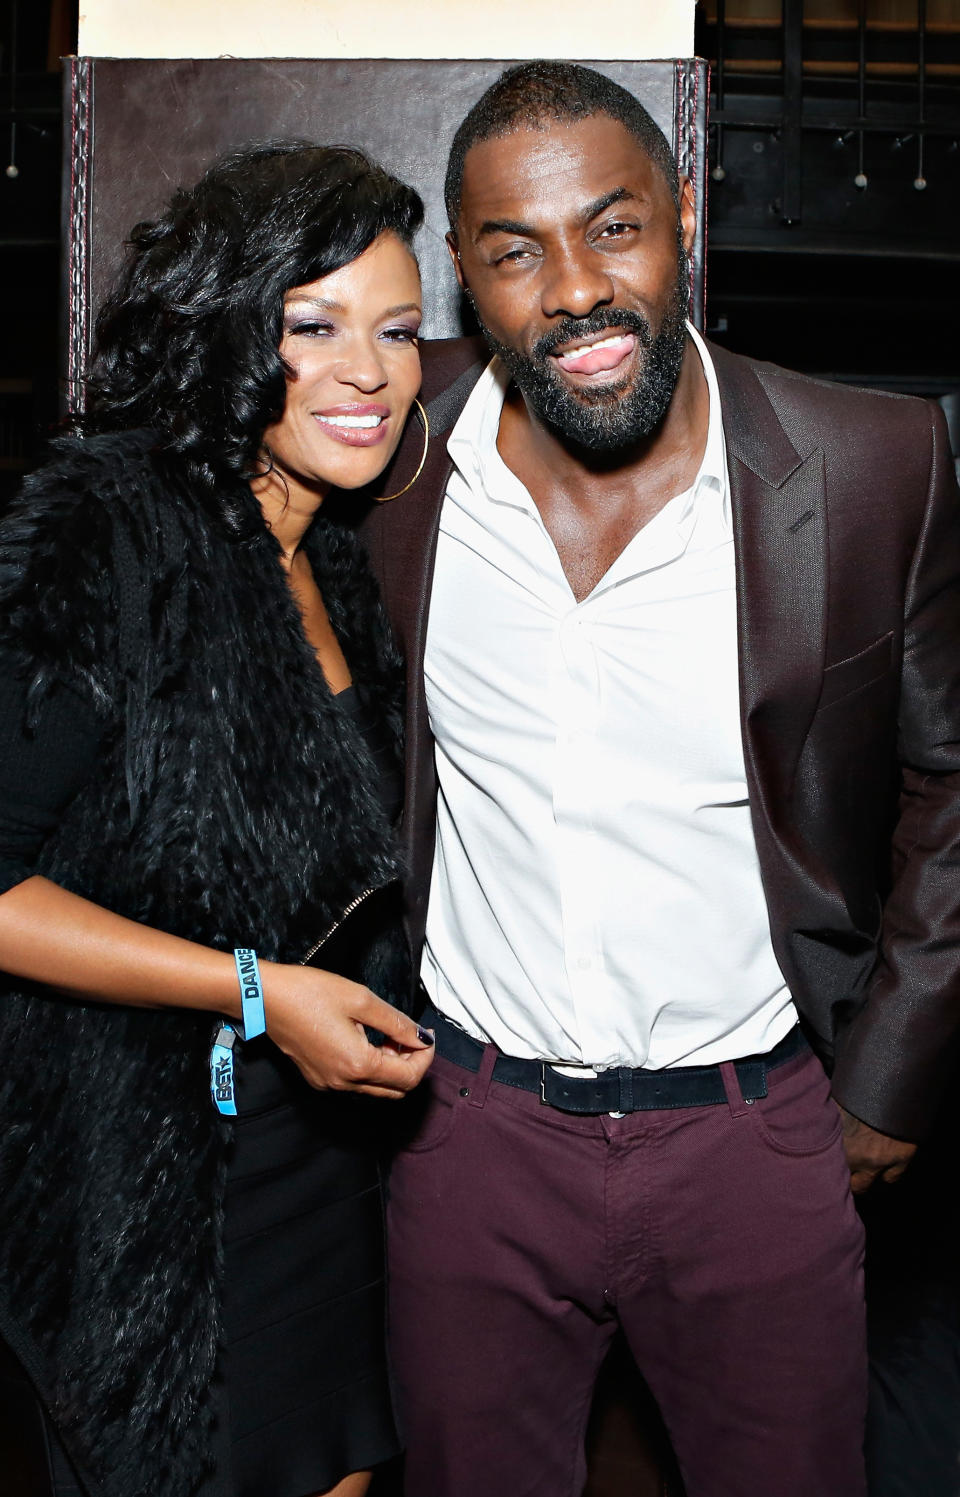 NEW YORK, NY - OCTOBER 13:  DJ Beverly Bond and actor Idris Elba attends BET's Black Girls Rock 2012 After Party at Millesime - The Carlton Hotel on October 13, 2012 in New York City.  (Photo by Cindy Ord/Getty Images for BET)